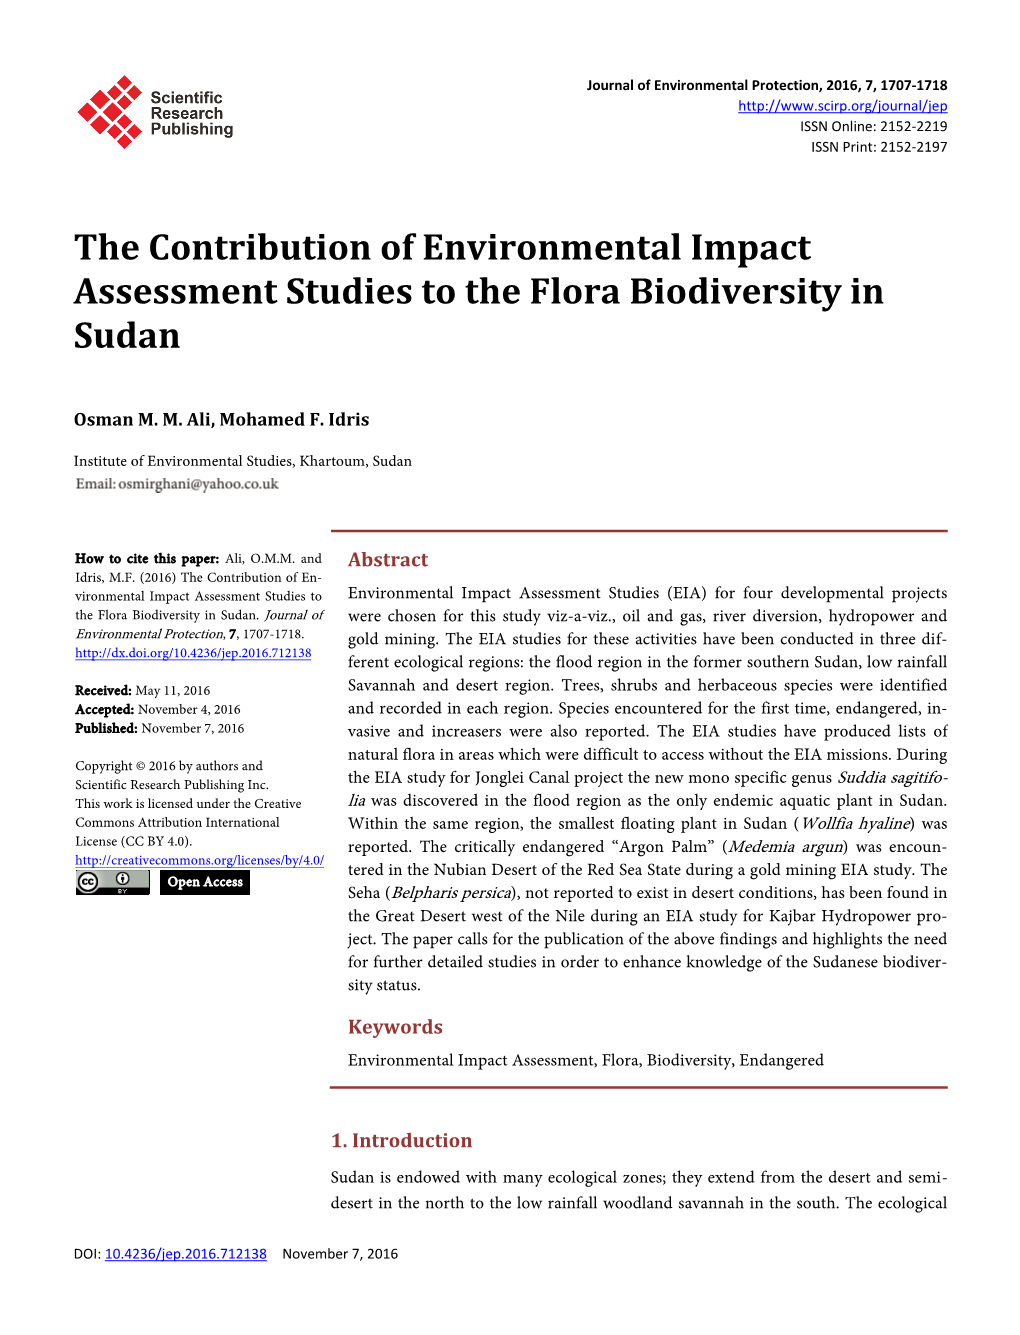 The Contribution of Environmental Impact Assessment Studies to the Flora Biodiversity in Sudan